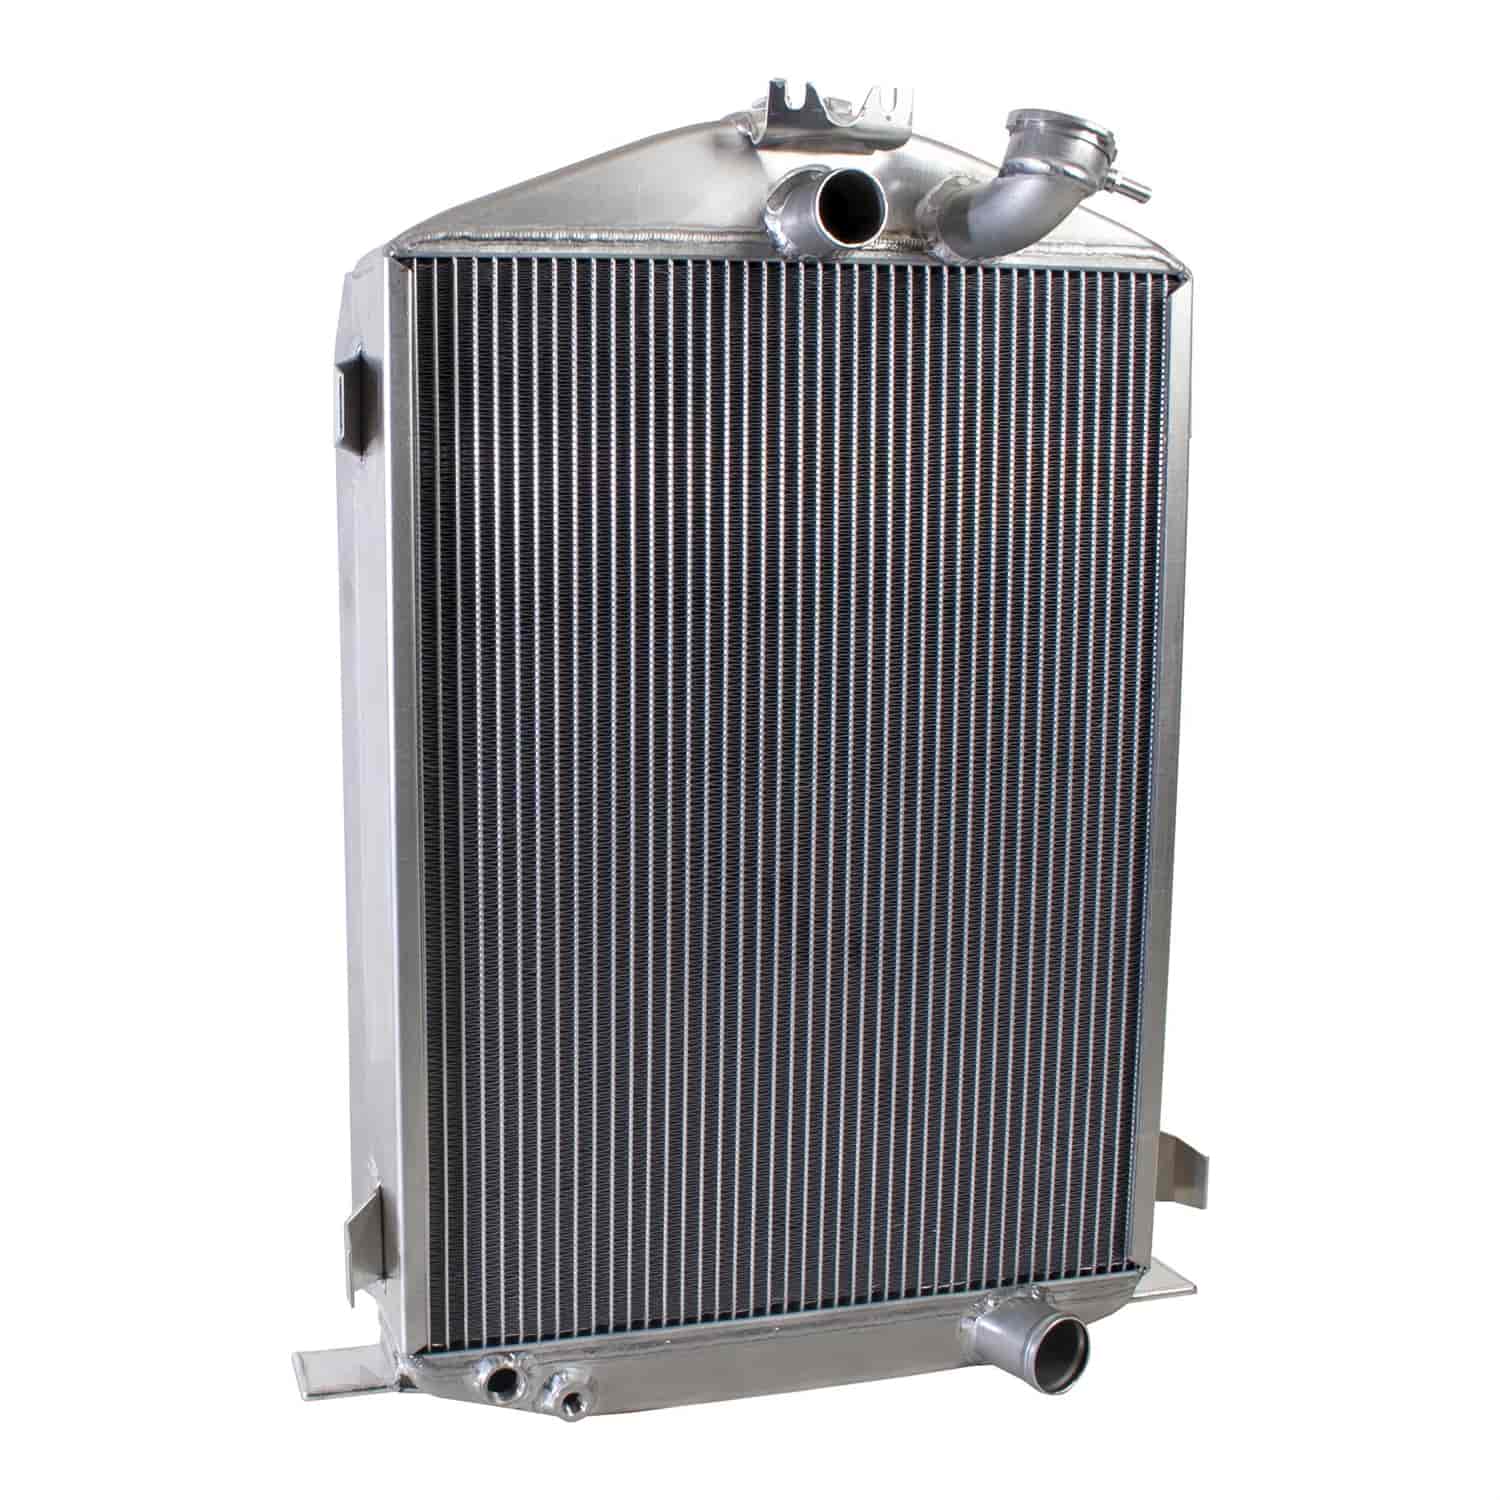 ExactFit Radiator for 1932 Model B with Early